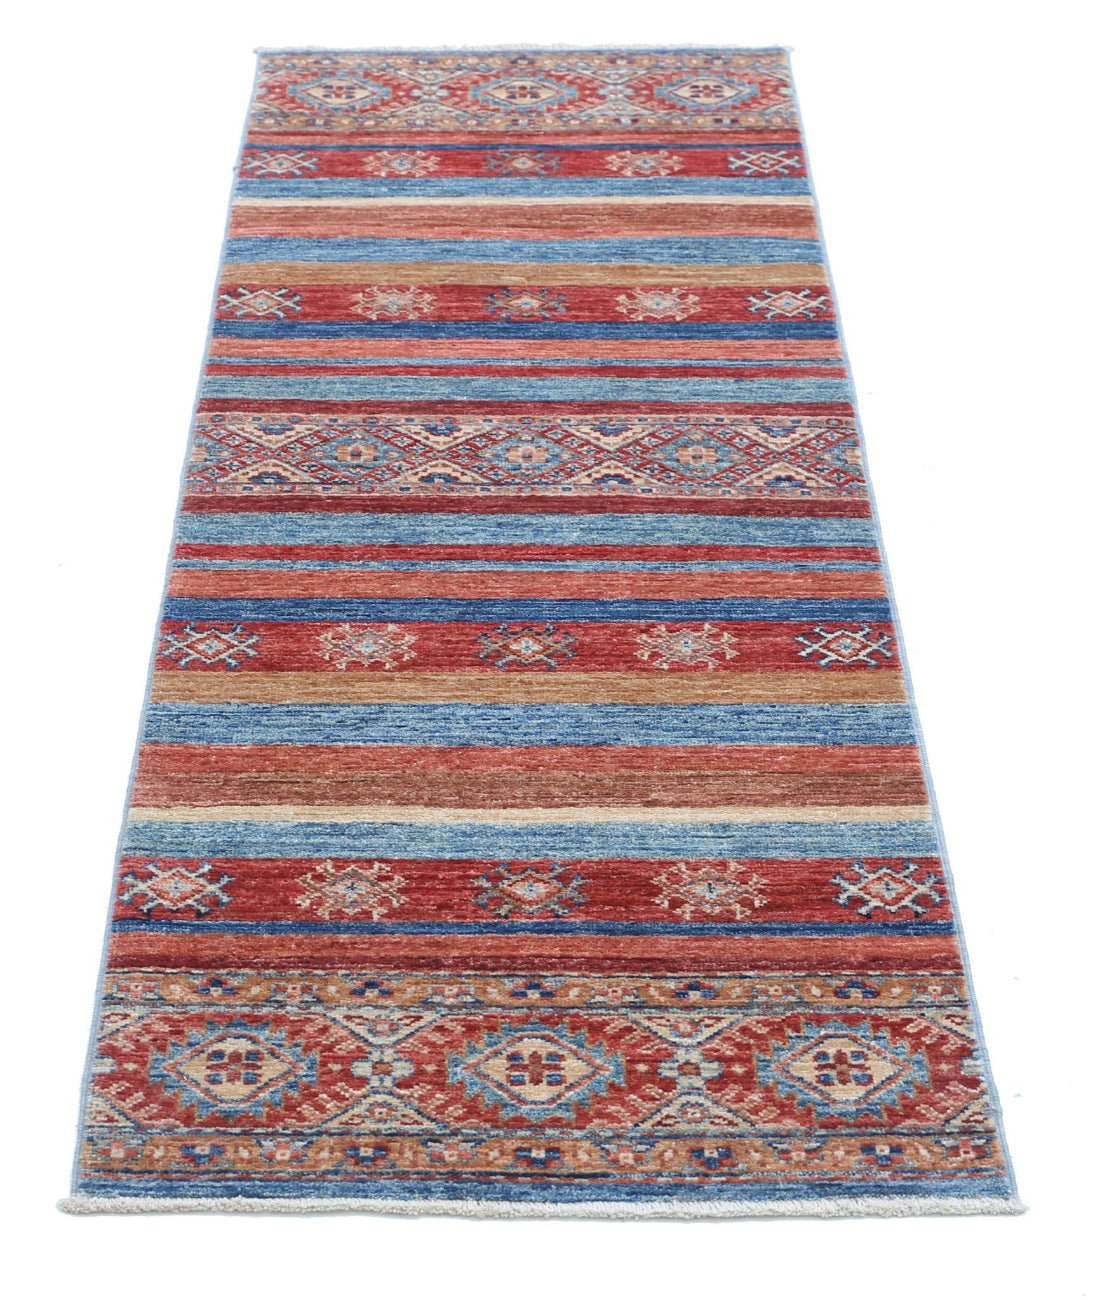 Hand Knotted Khurjeen Wool Rug - 1'11'' x 5'10'' 1'11'' x 5'10'' (58 X 175) / Multi / Multi